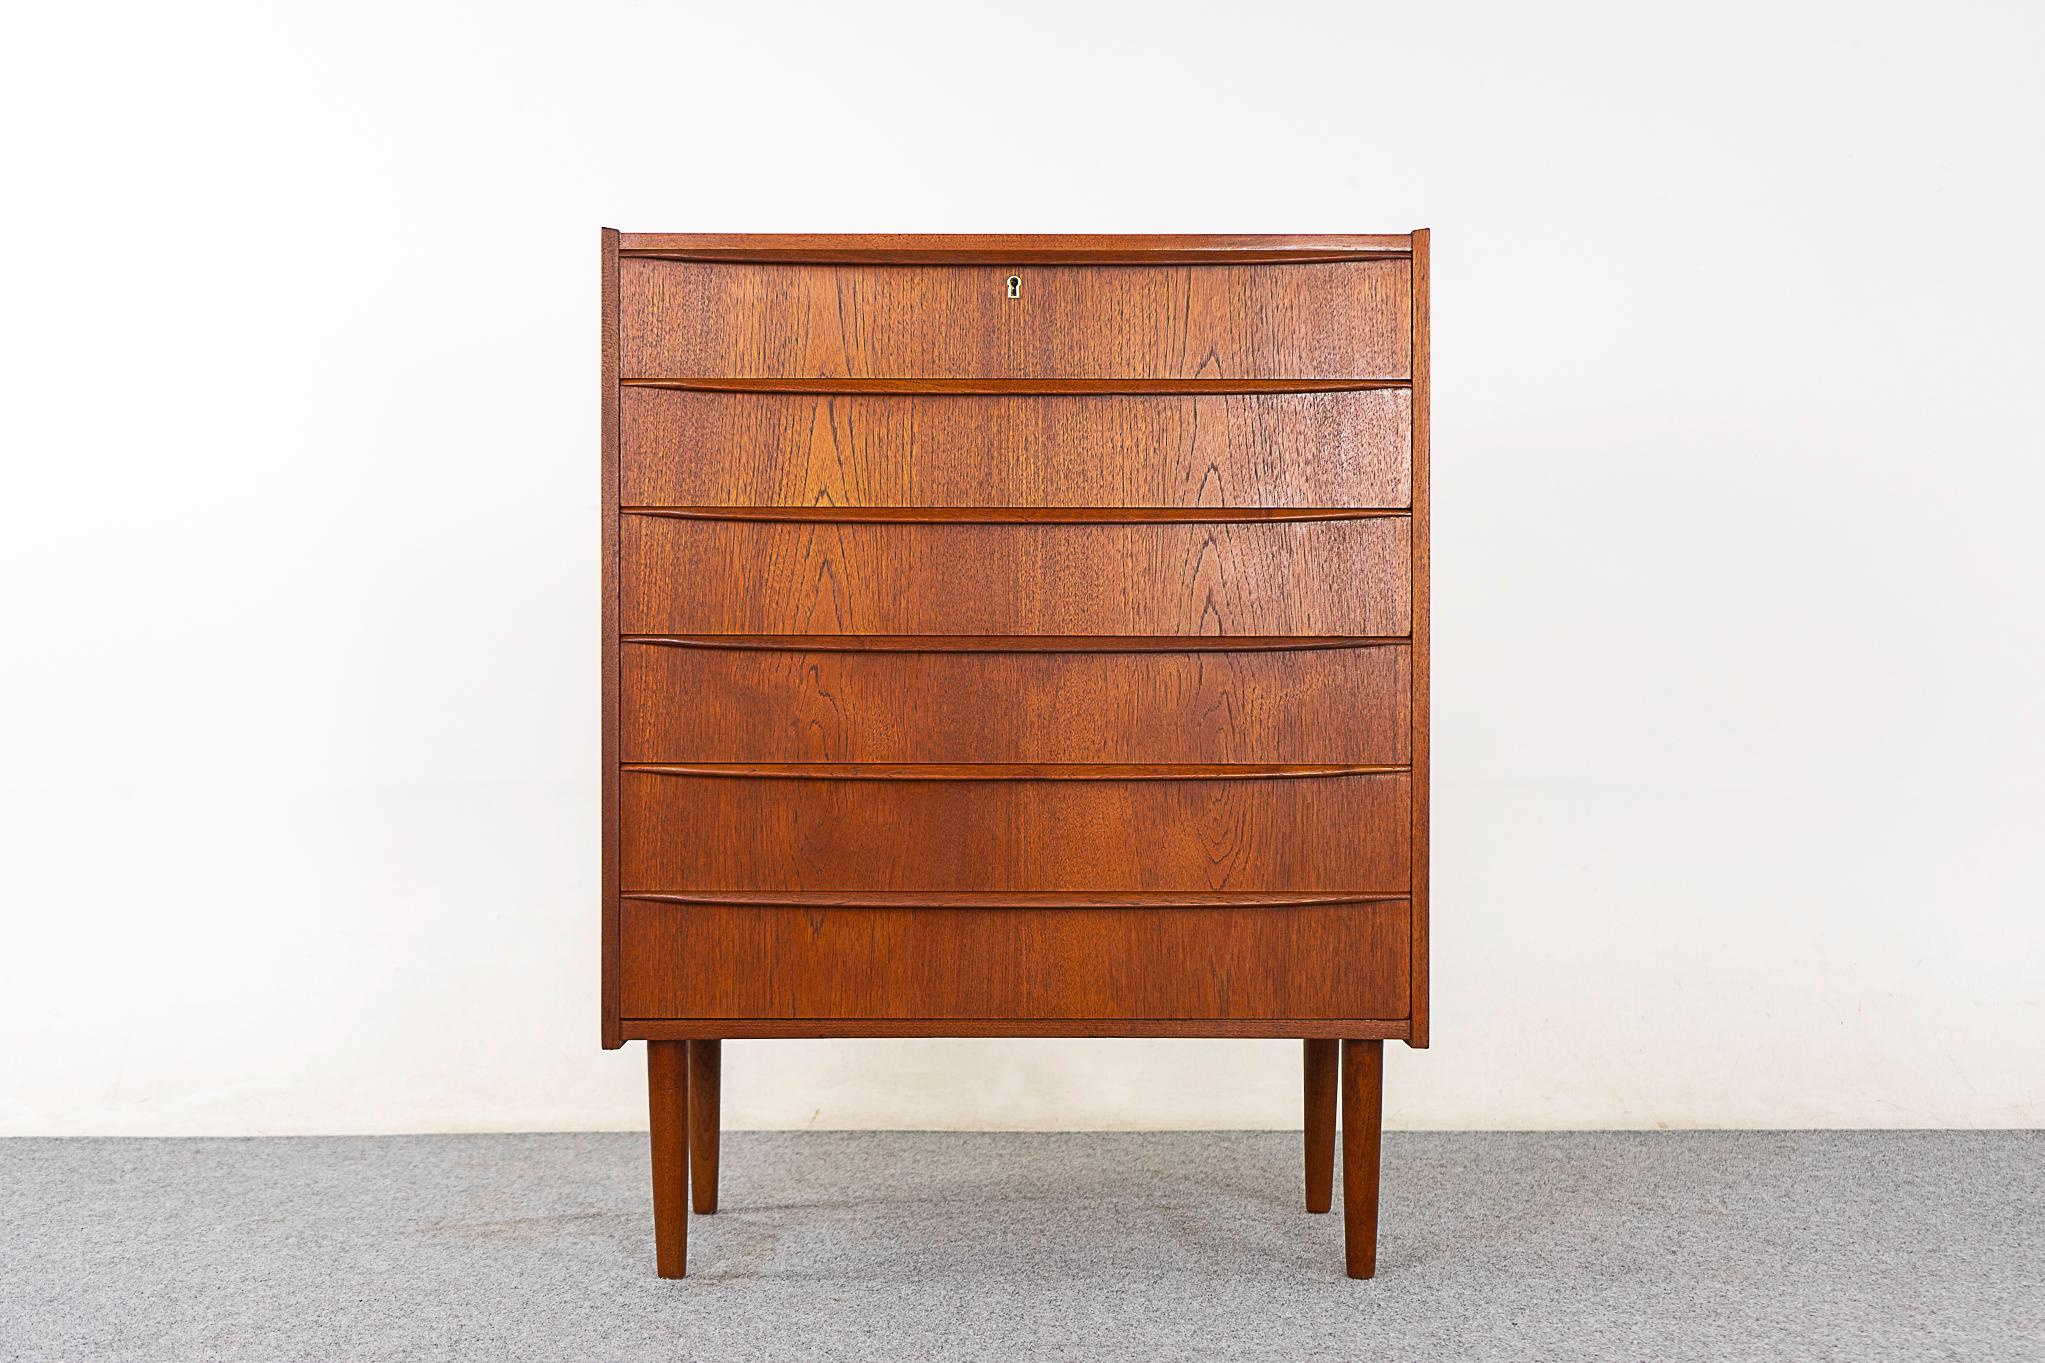 Teak Danish dresser, circa 1960's. Lovely book-matched veneer on all drawer faces and solid wood edging and legs. Dovetail constructed drawers with integrated, horizontal drawer pulls. Simple, elegant!